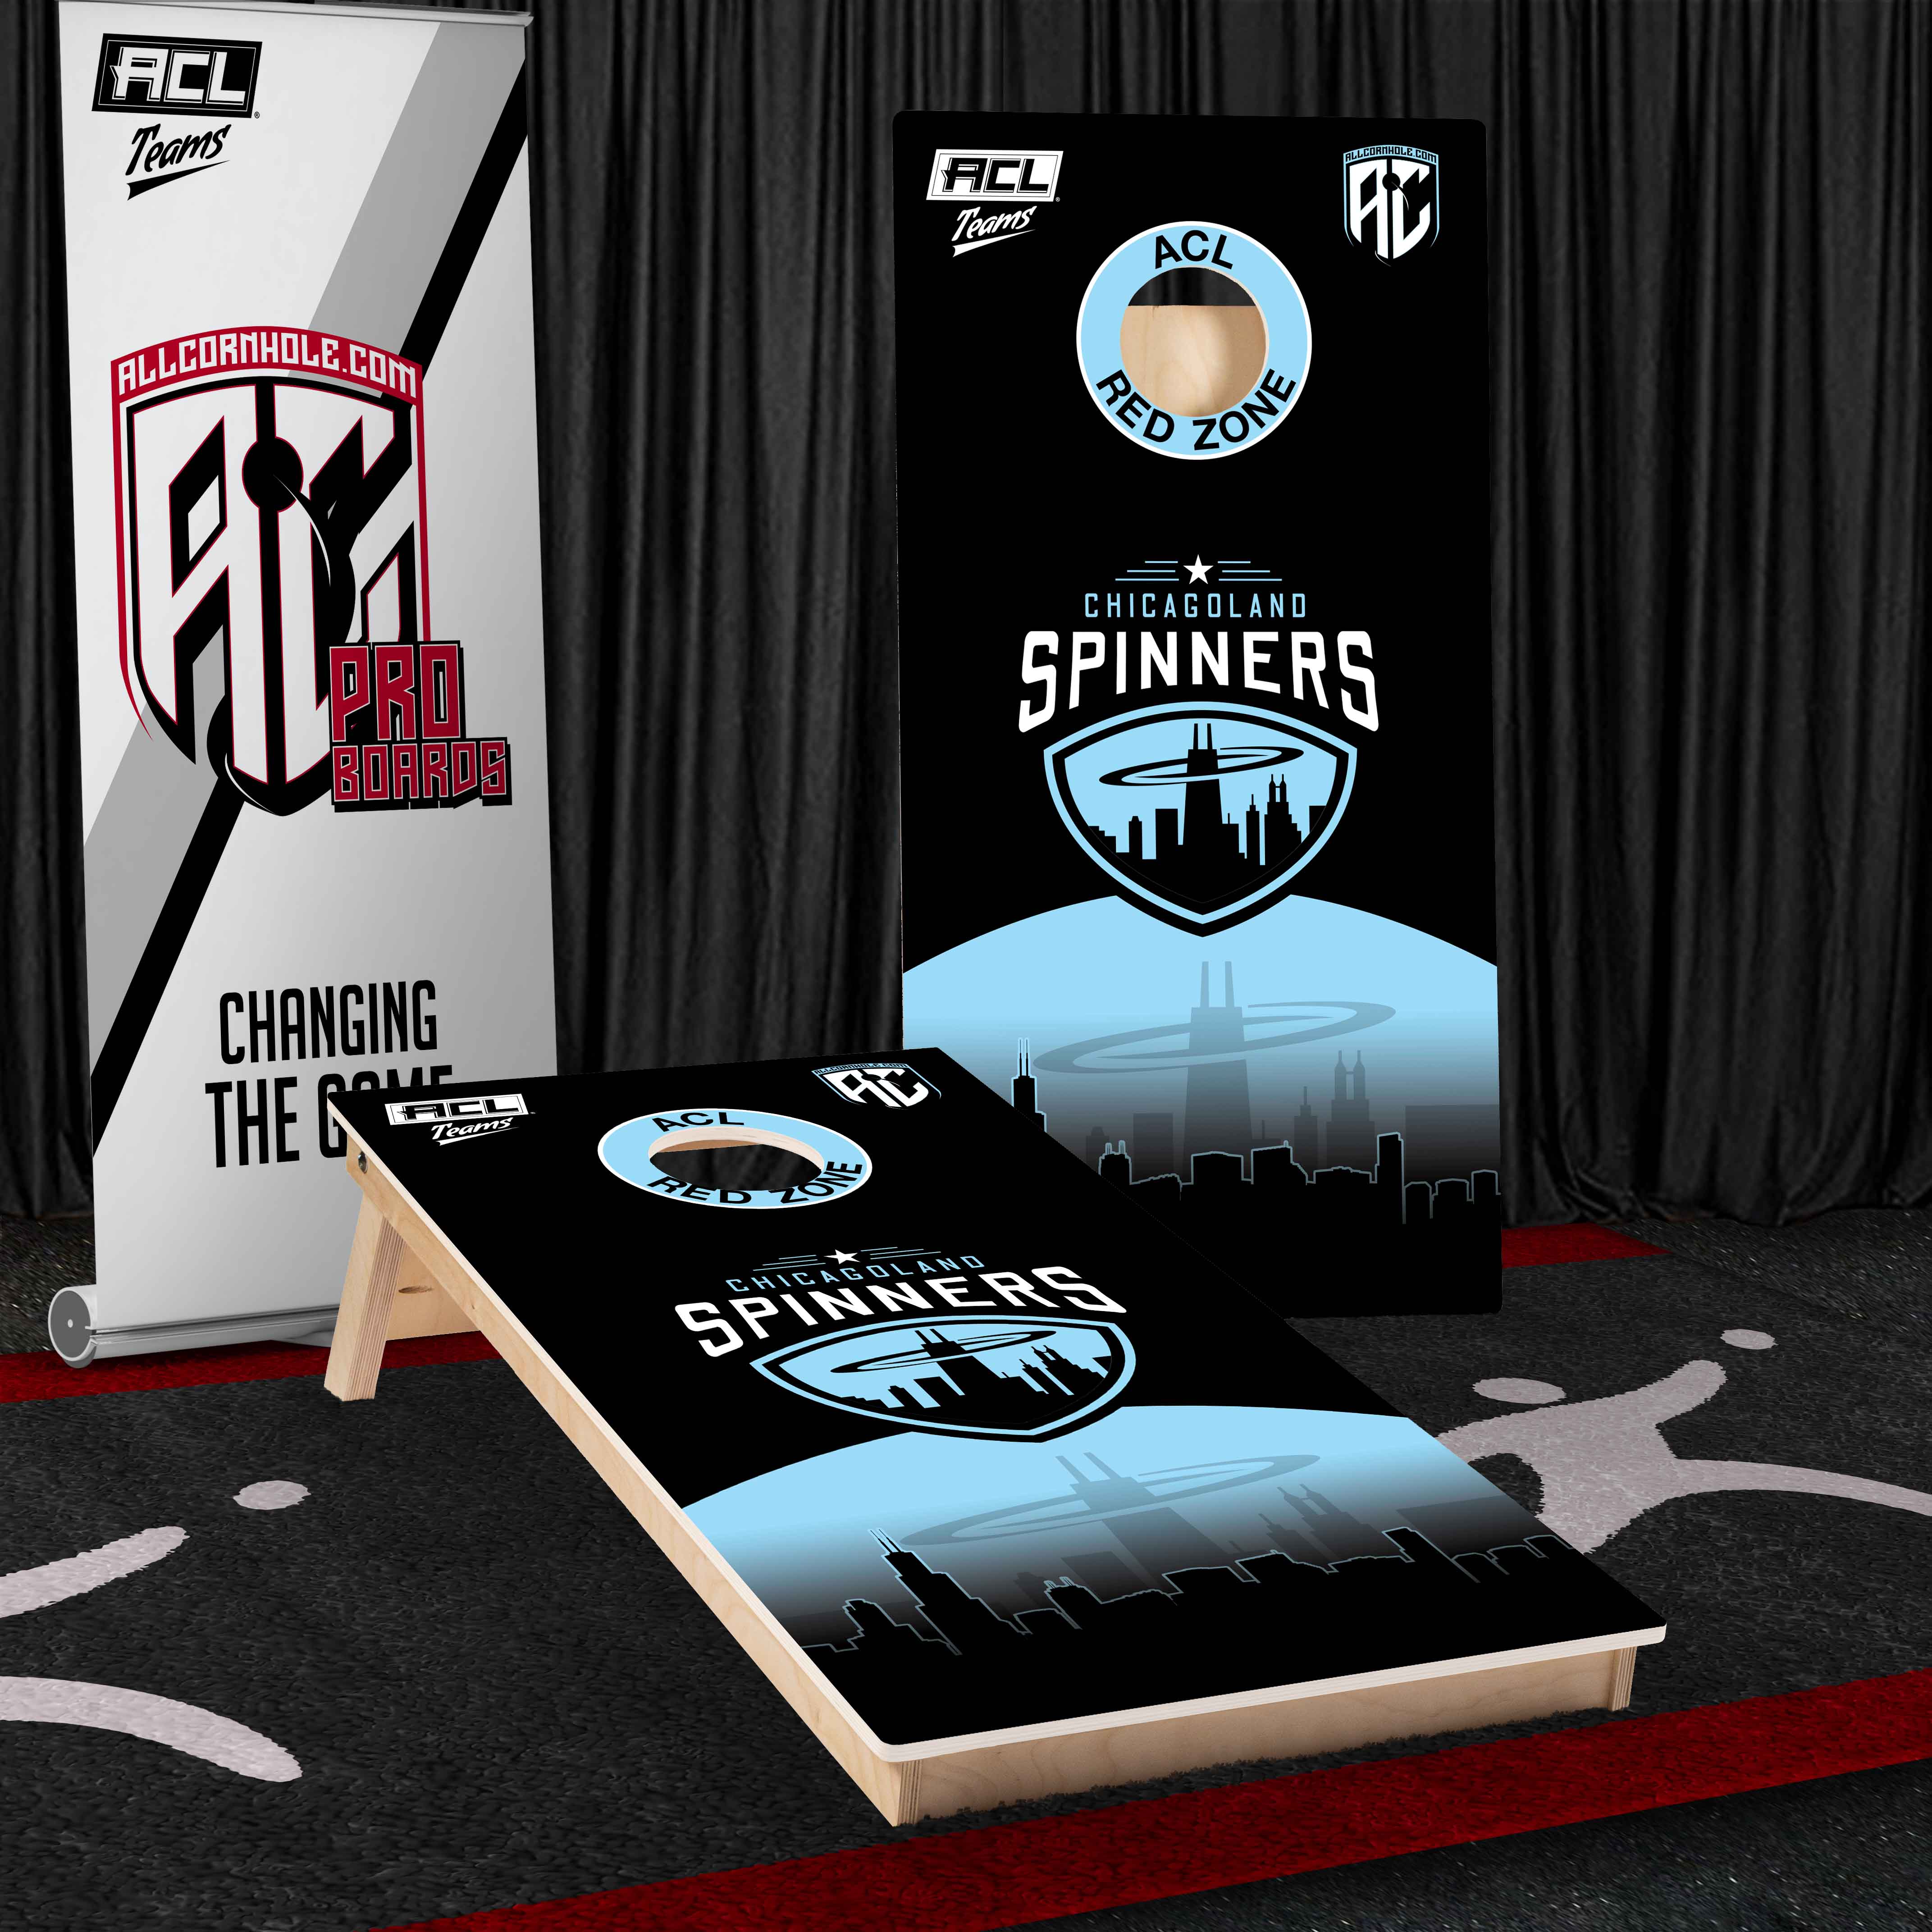 ACL Teams Pro Cornhole Board - Chicagoland Spinners